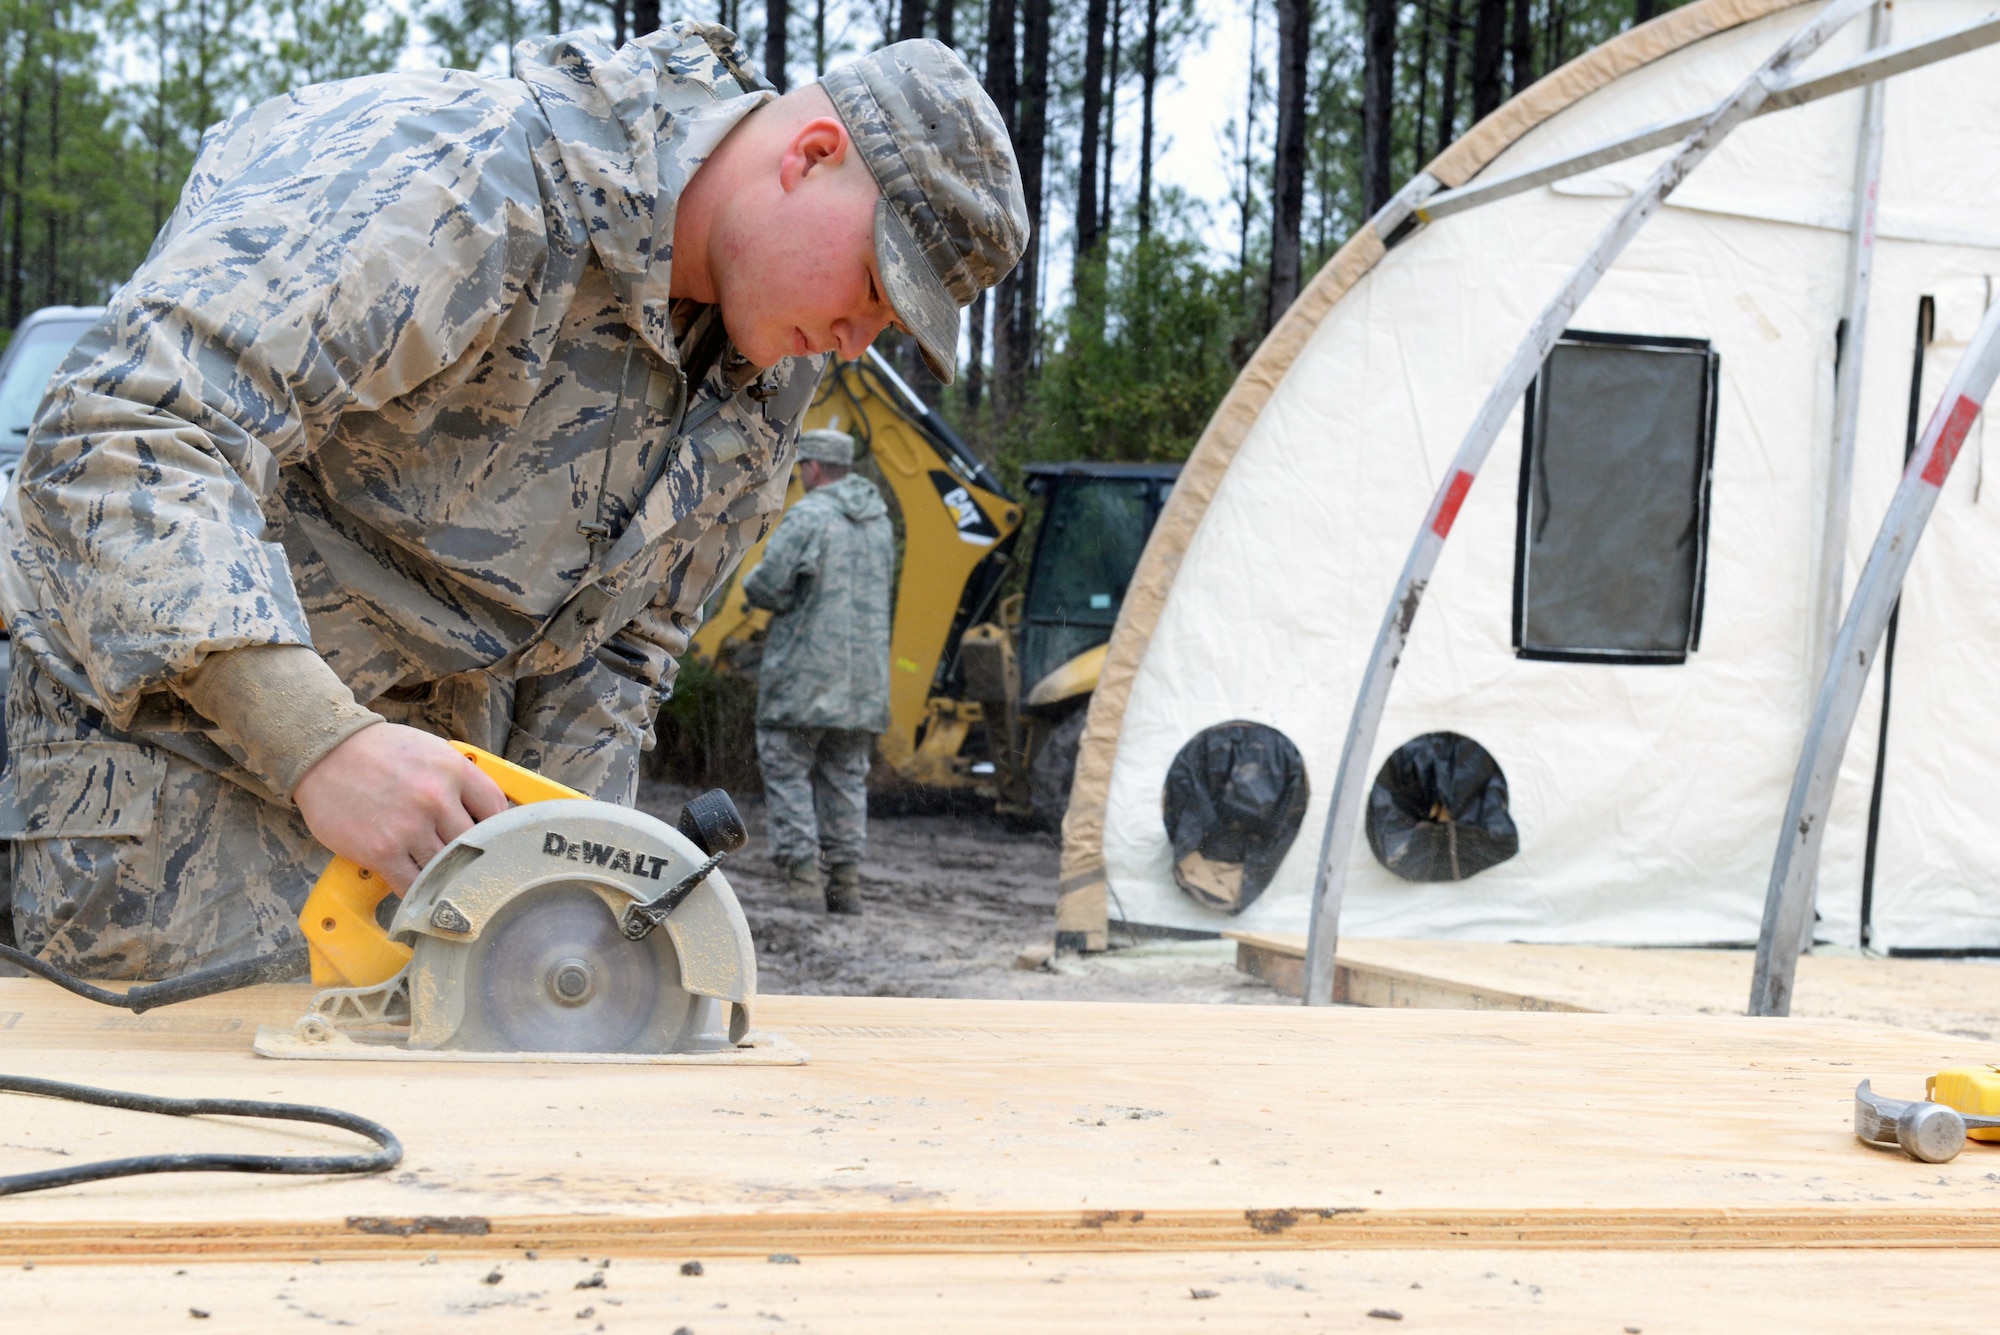 U.S. Air Force Airman 1st Class Thomas Reed cuts a wooden plank Feb. 24, 2015, near Statenville, Ga. The planks were used as a foundation for building a command post in response to a non-lethal aircraft accident involving an F/A-18D Hornet assigned to Marine Corps Air Staton Beaufort, S.C. Reed is a 23rd Civil Engineer Squadron electrical power production journeyman. (U.S. Air Force photo/Airman Greg Nash)